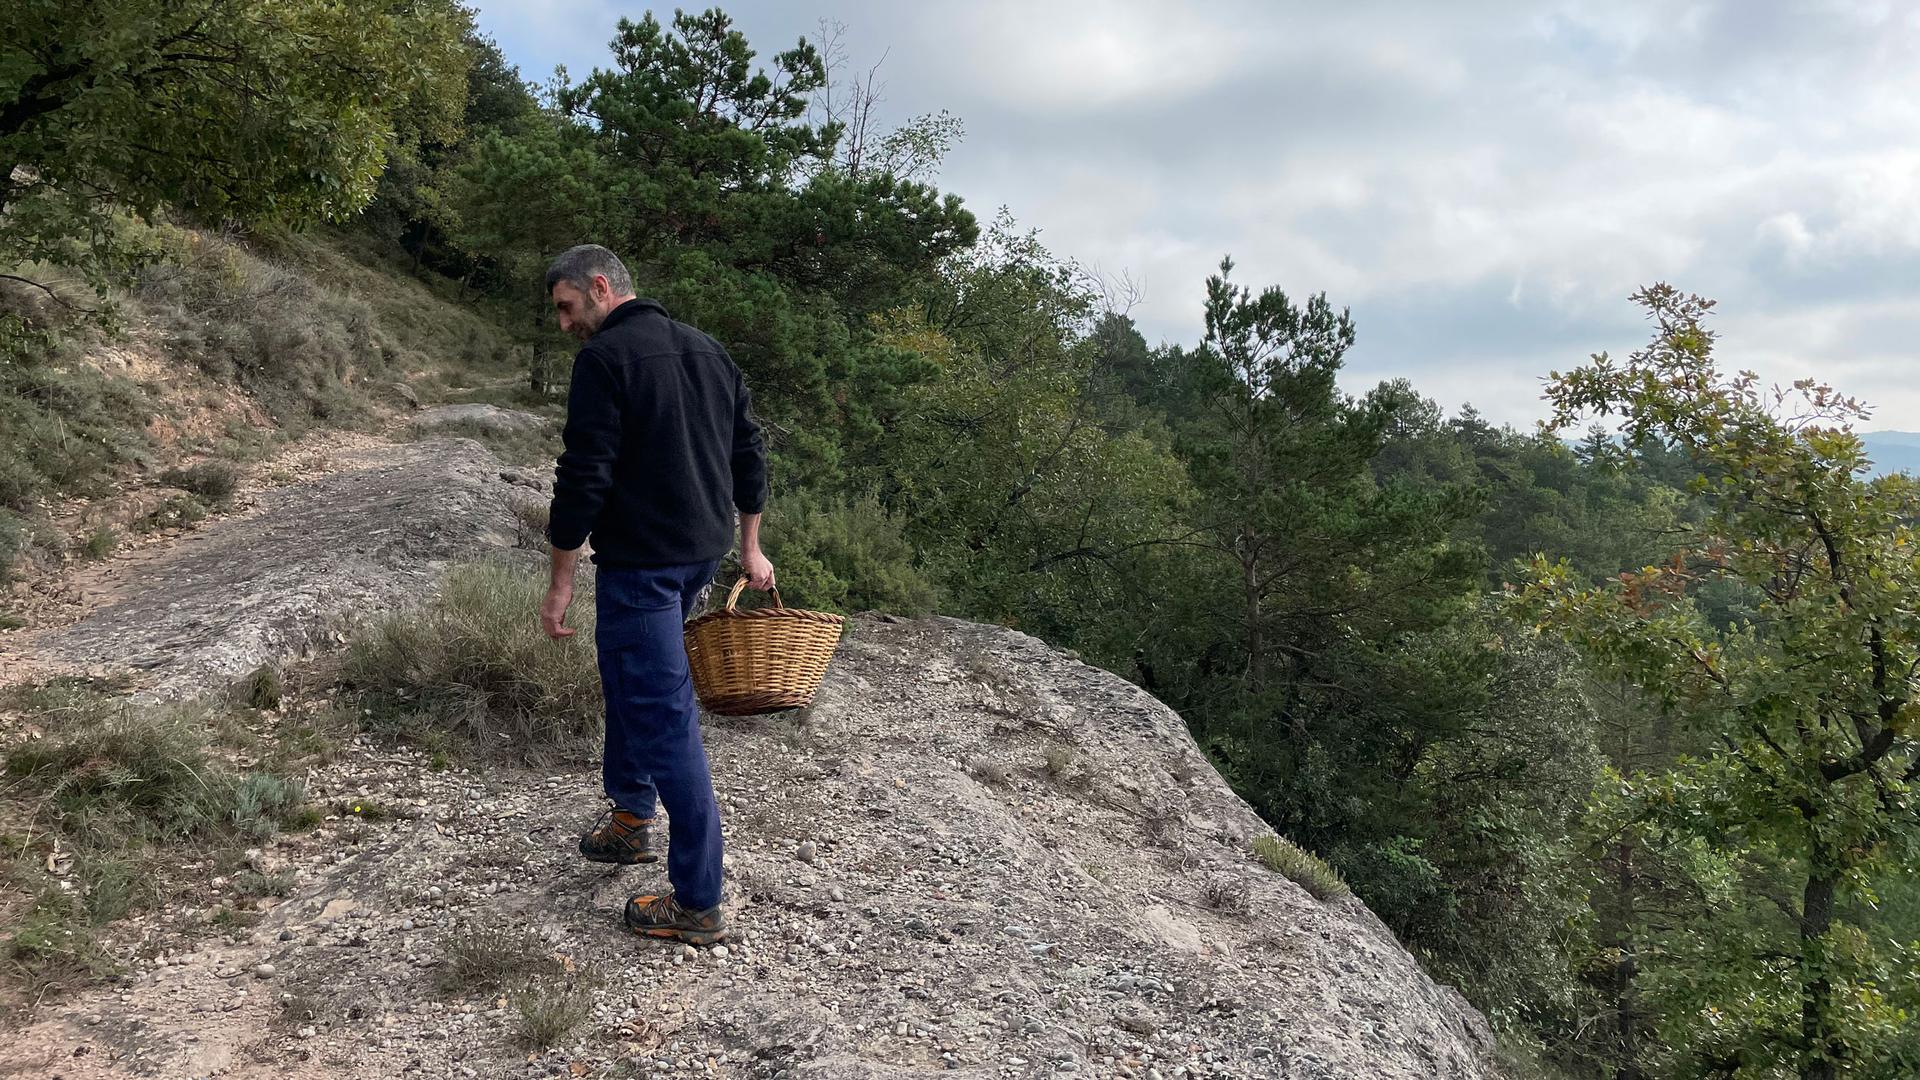 Pep González, a longtime mushroom forager, on a hunt for mushrooms in the forest. 